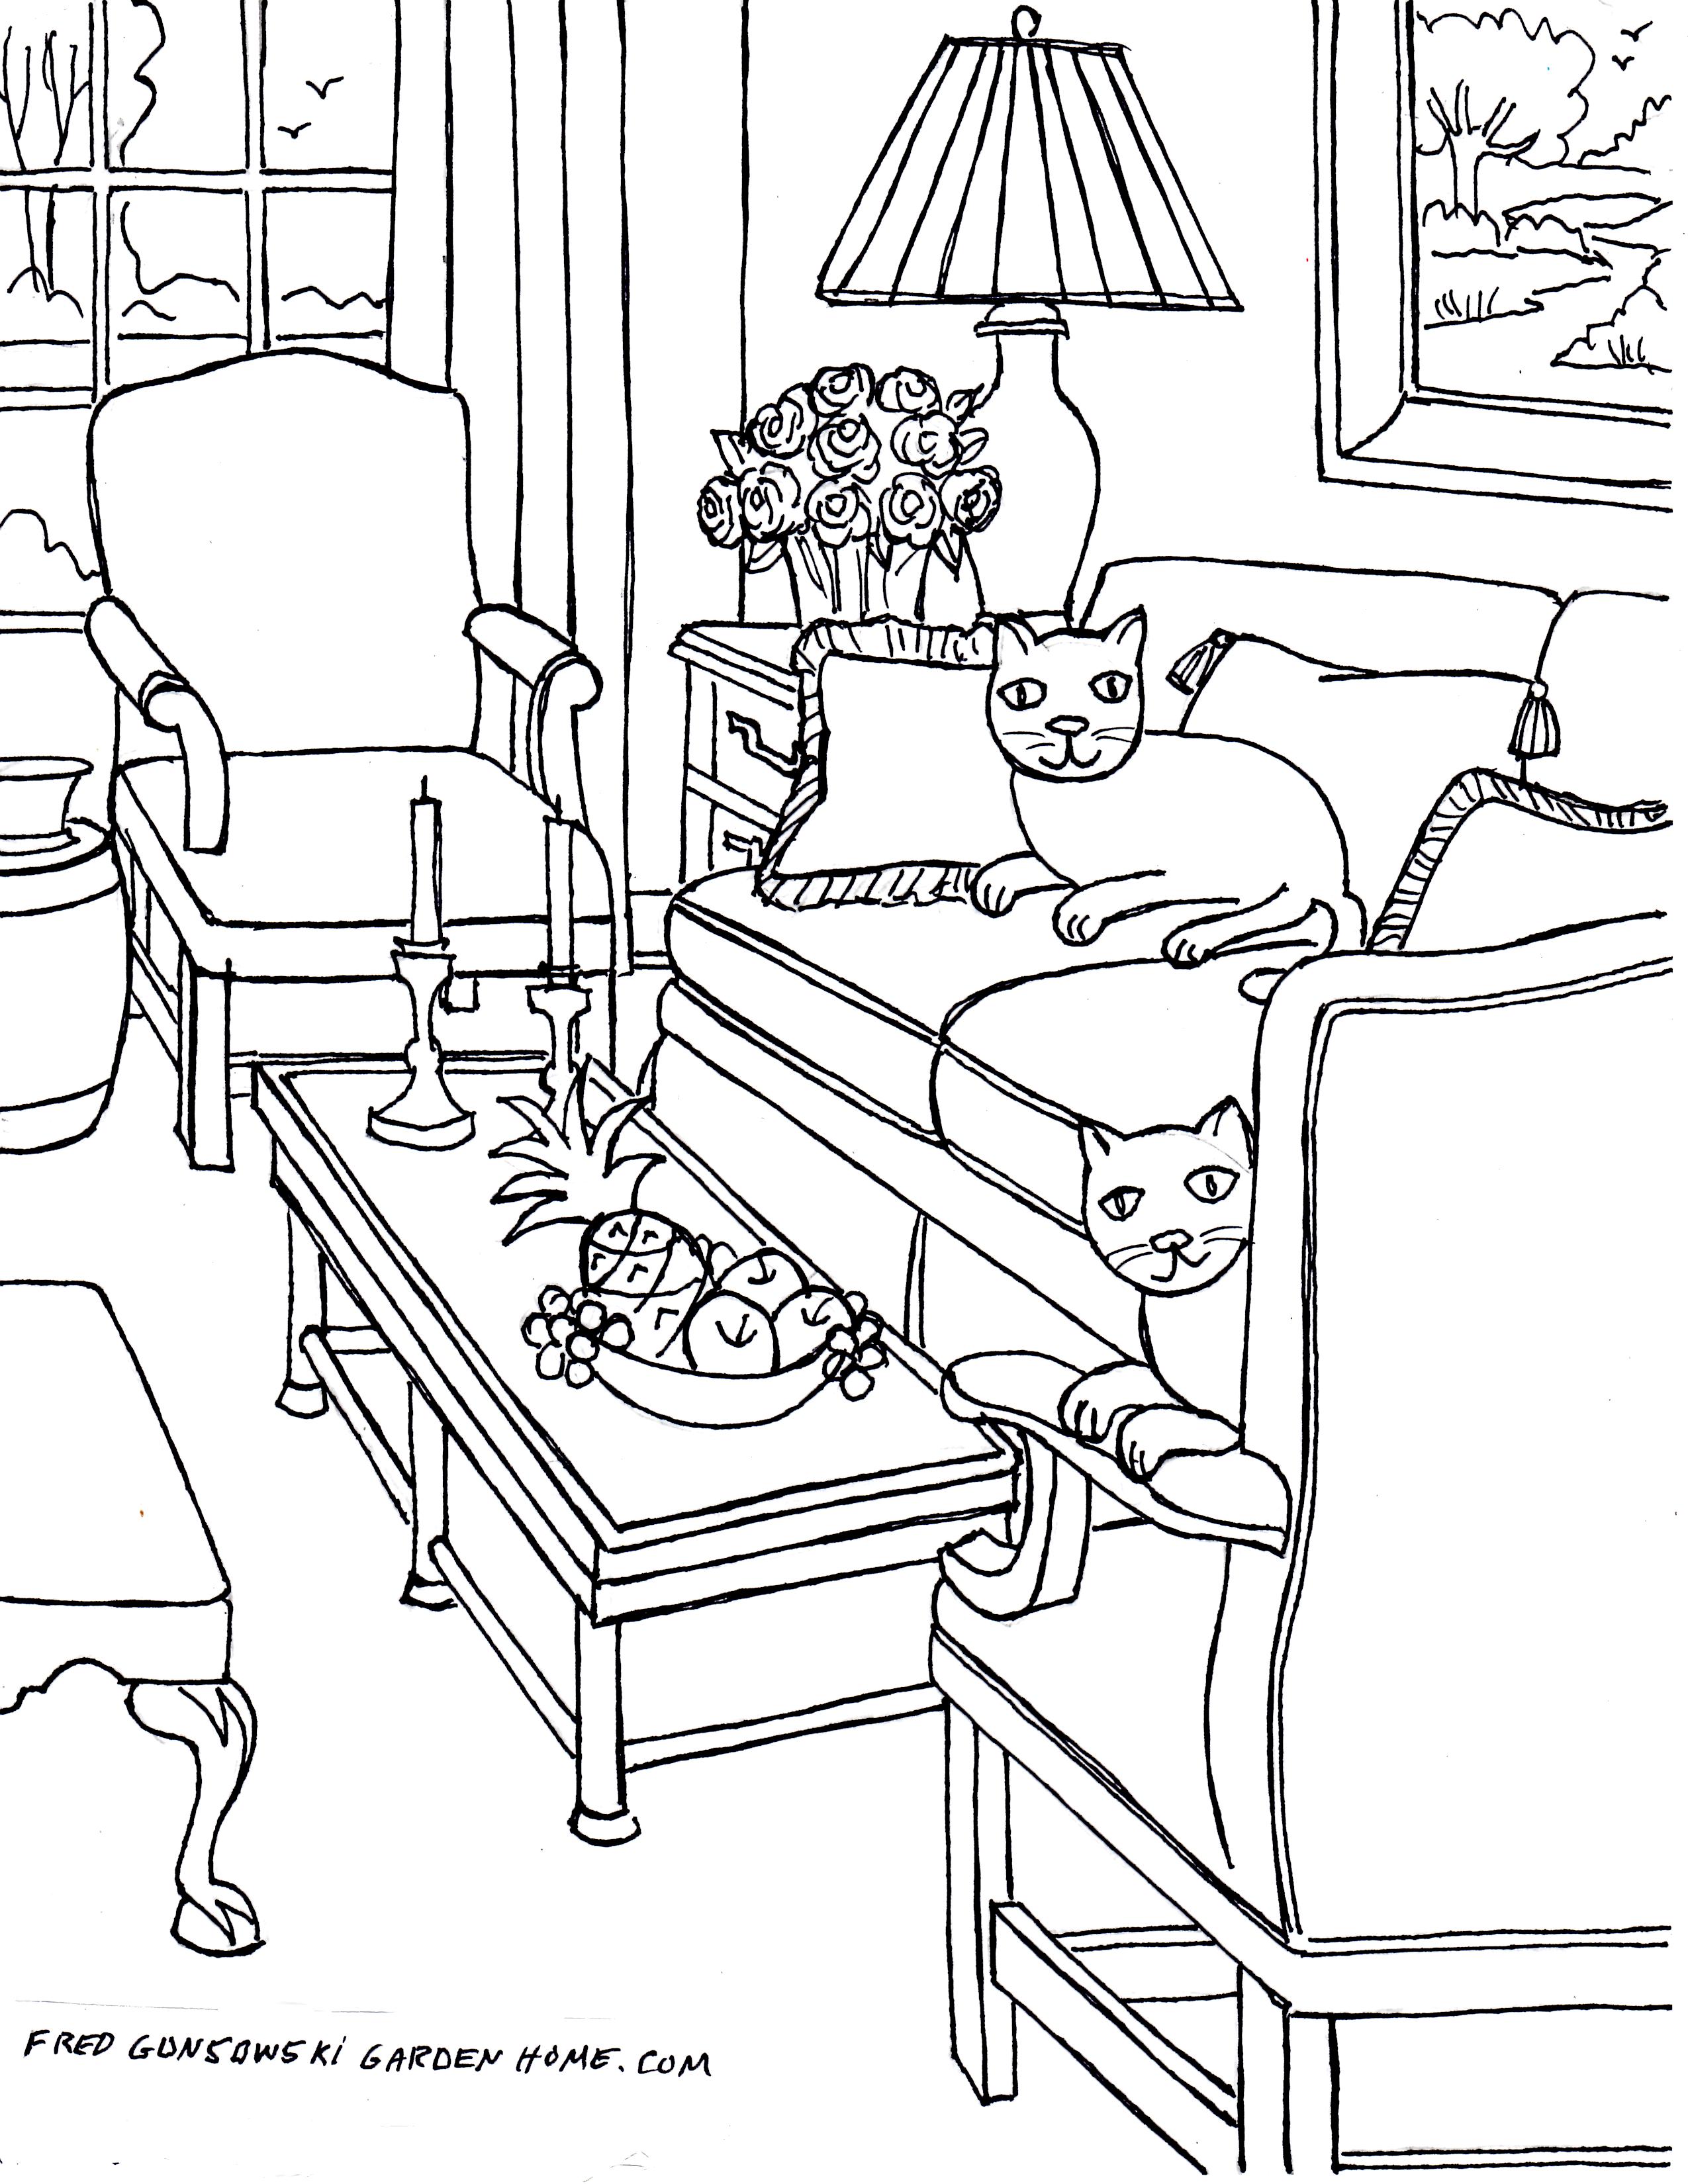 printable-inside-house-coloring-pages